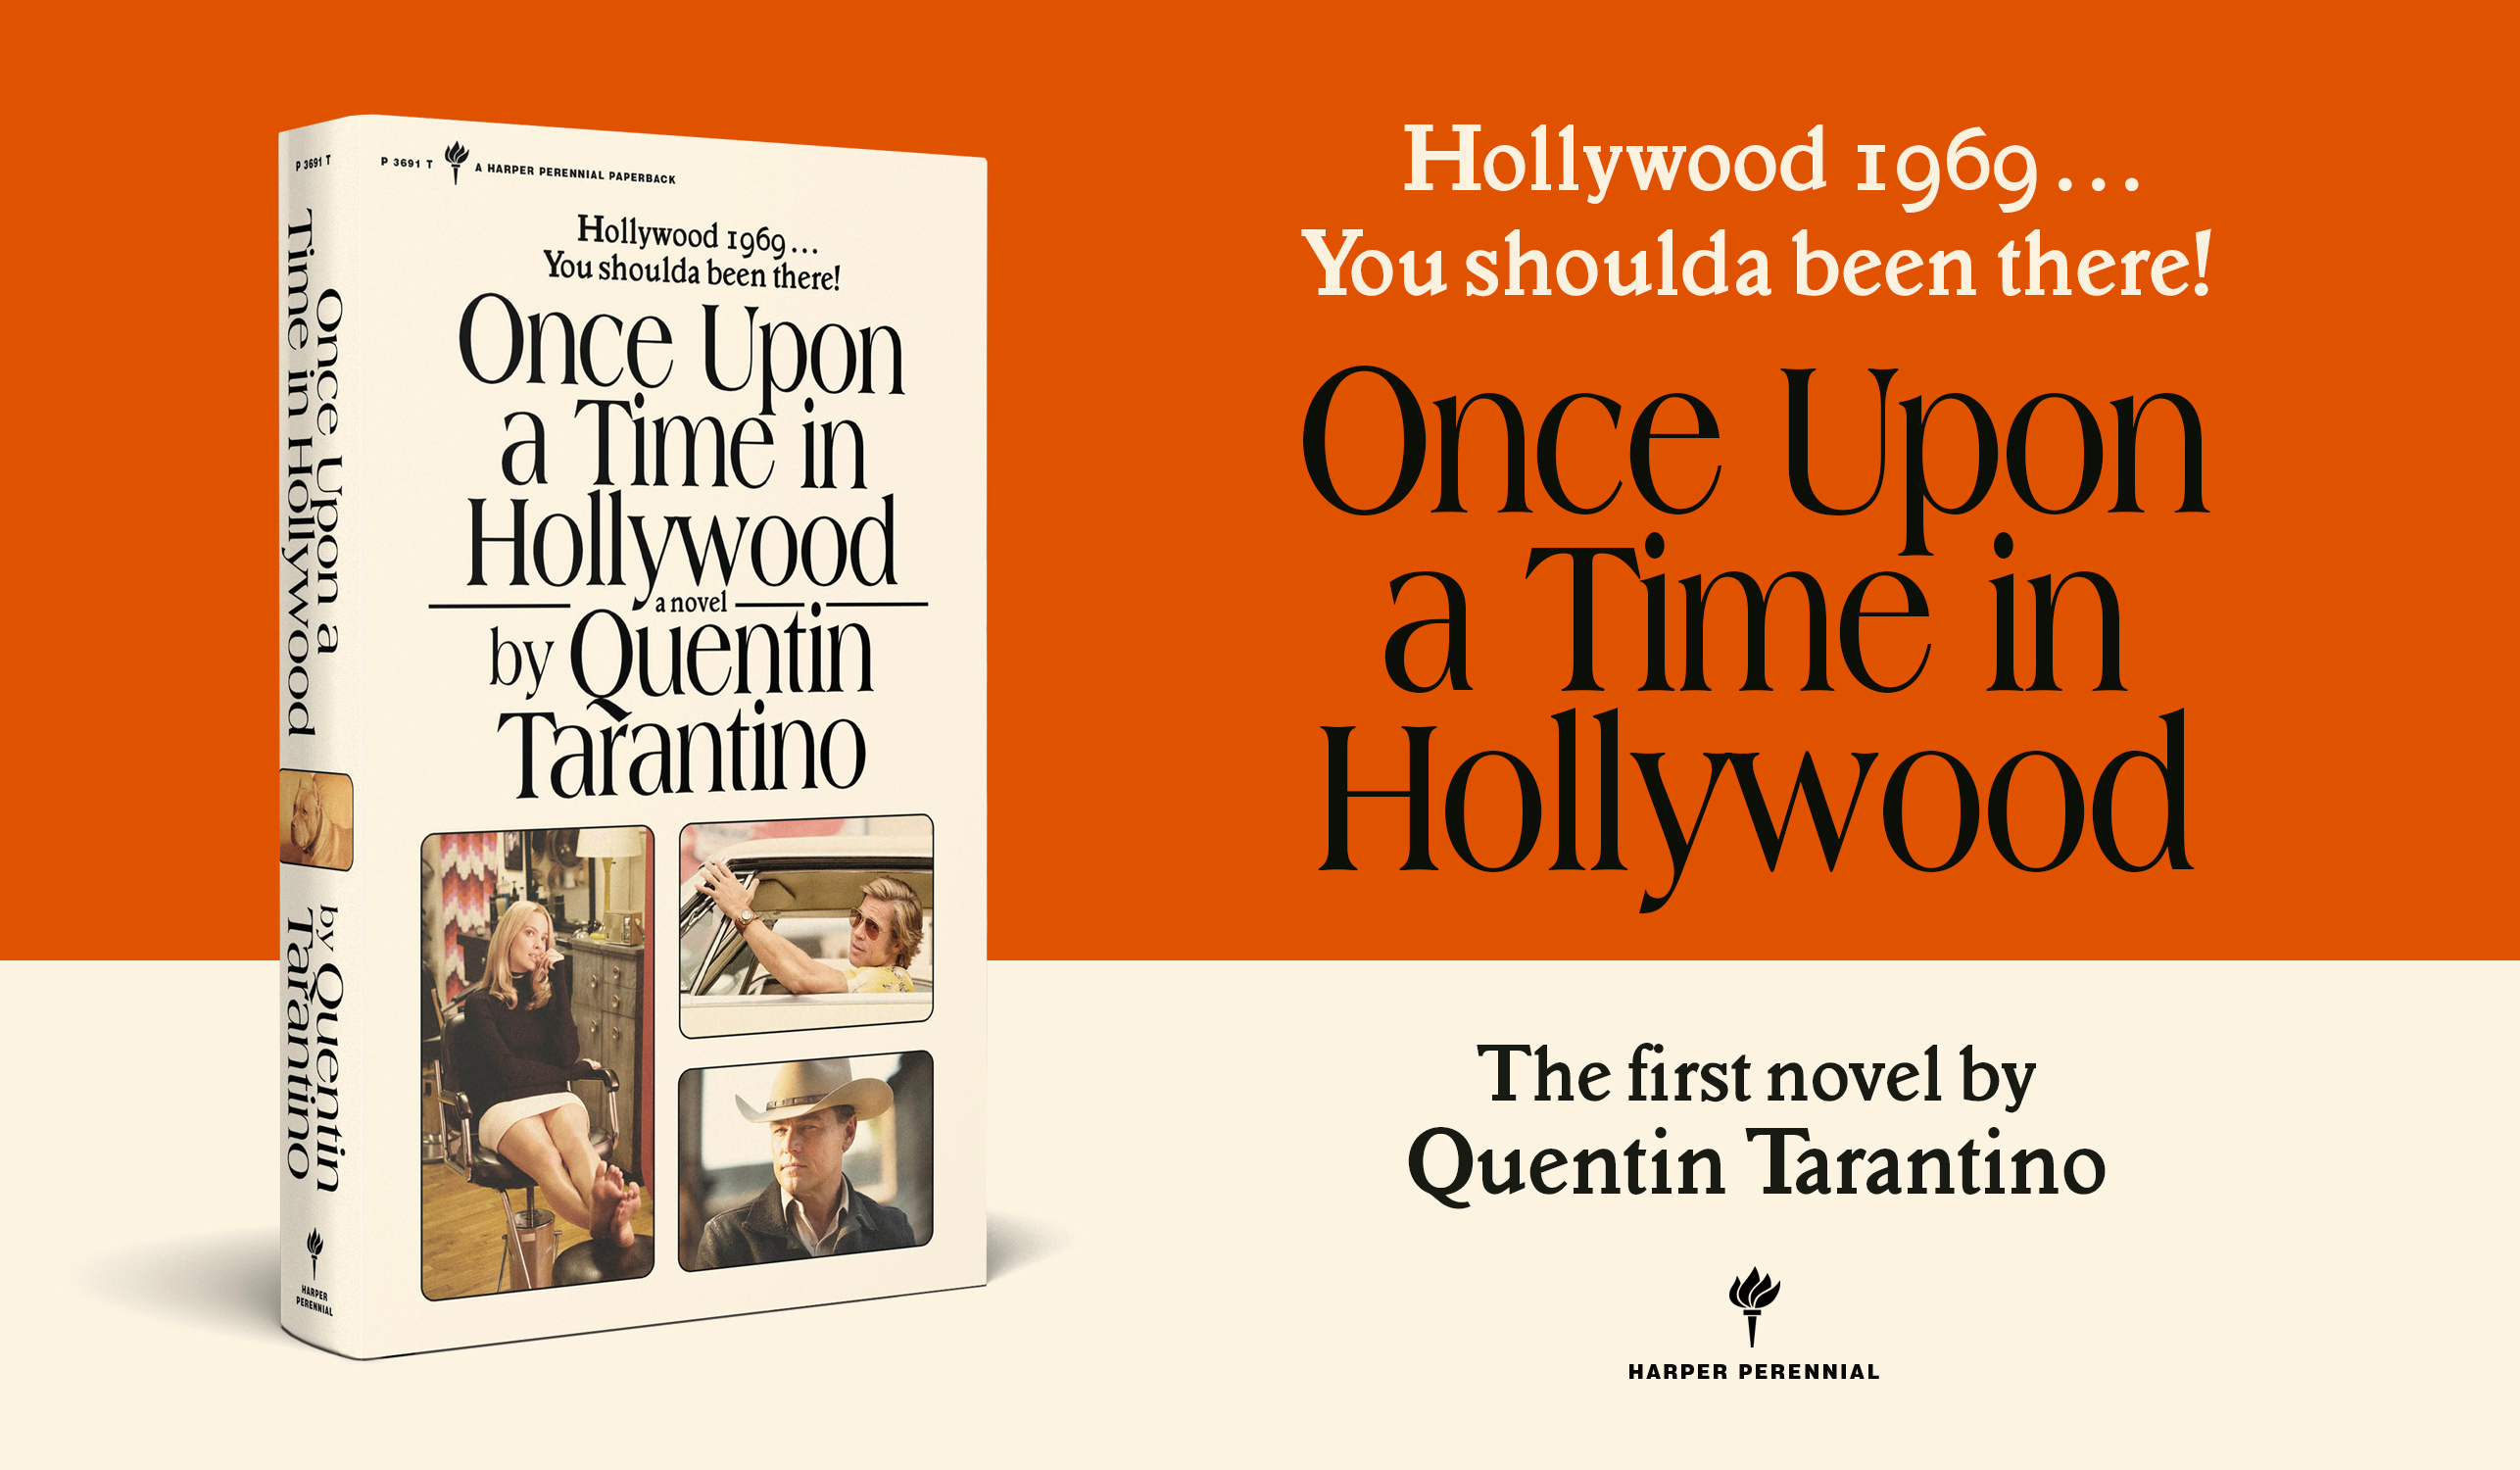 ONCE UPON A TIME... IN HOLLYWOOD novel by Quinten Tarantino